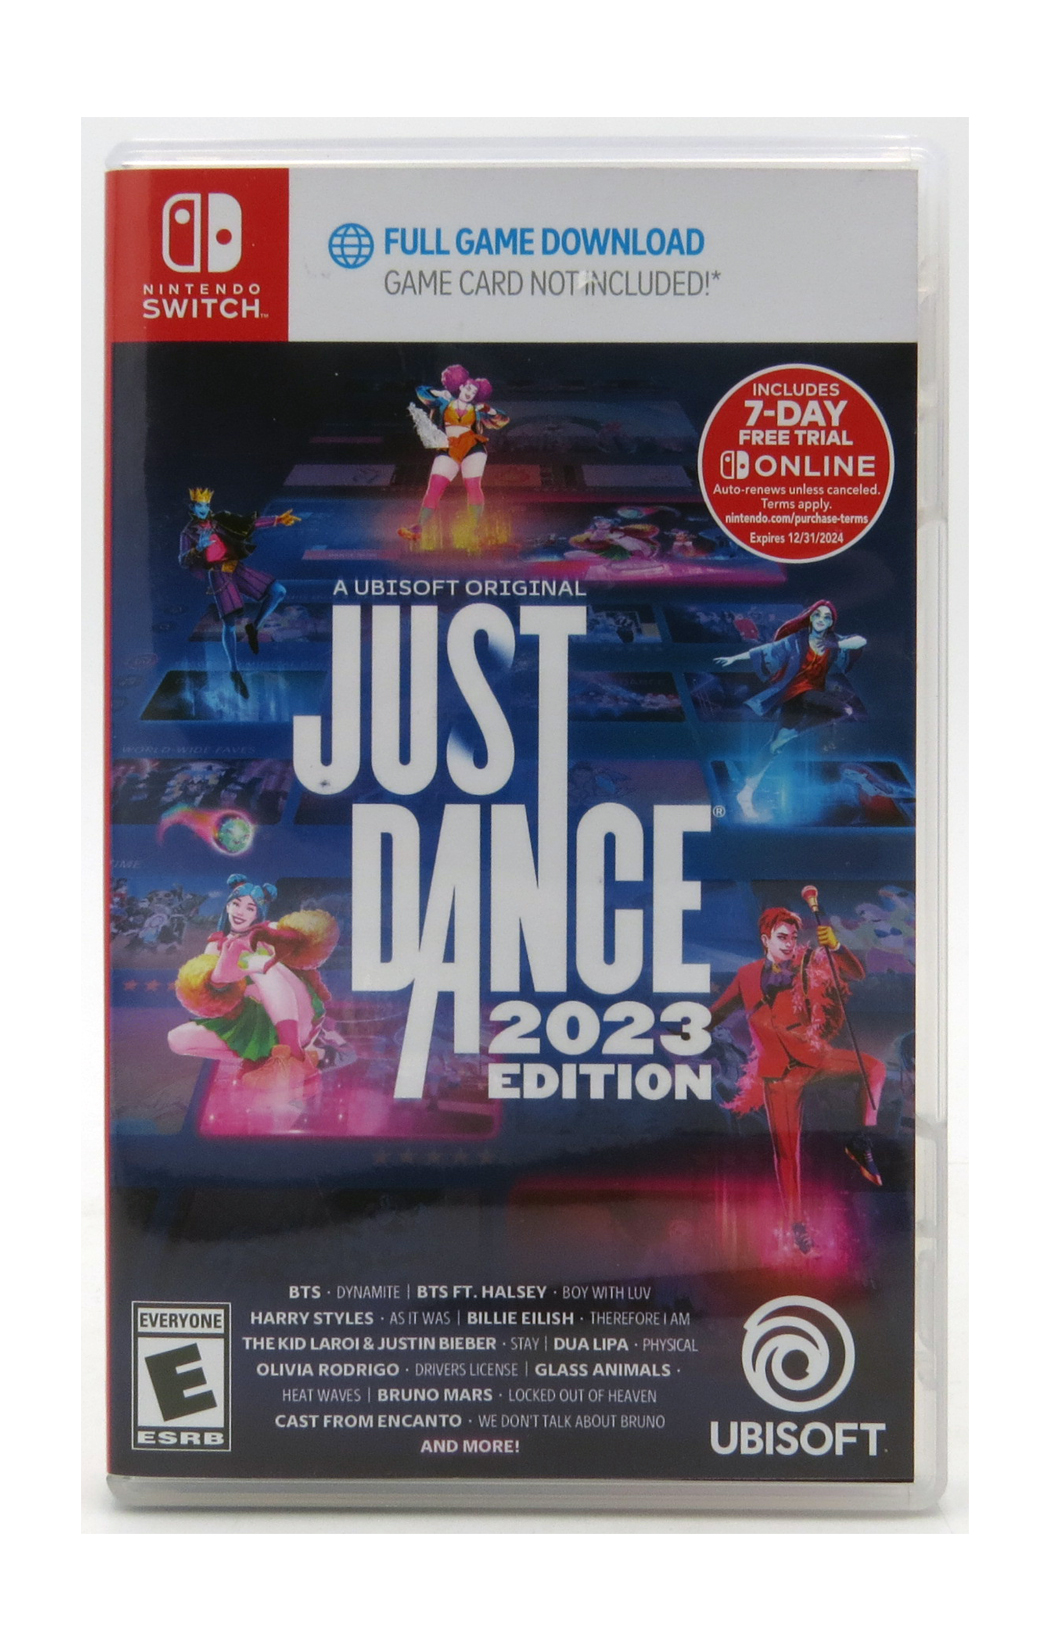 Just Dance | eBay in 887256113834 Edition Box 2023 - Switch In Game Original Package Nintendo Code